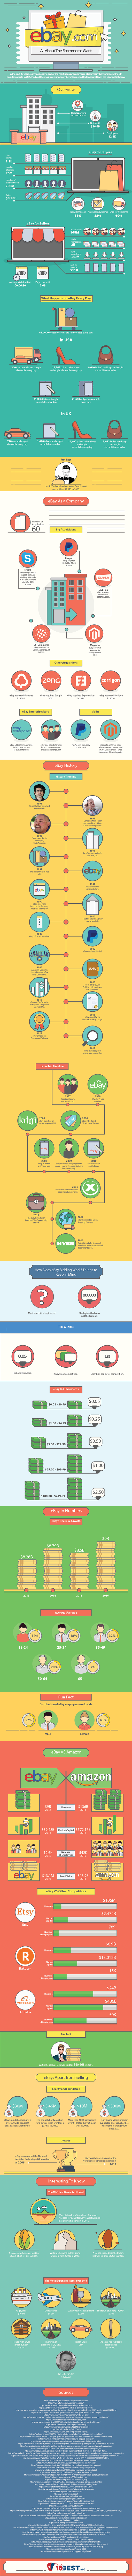 A Short History of eBay - Infographic